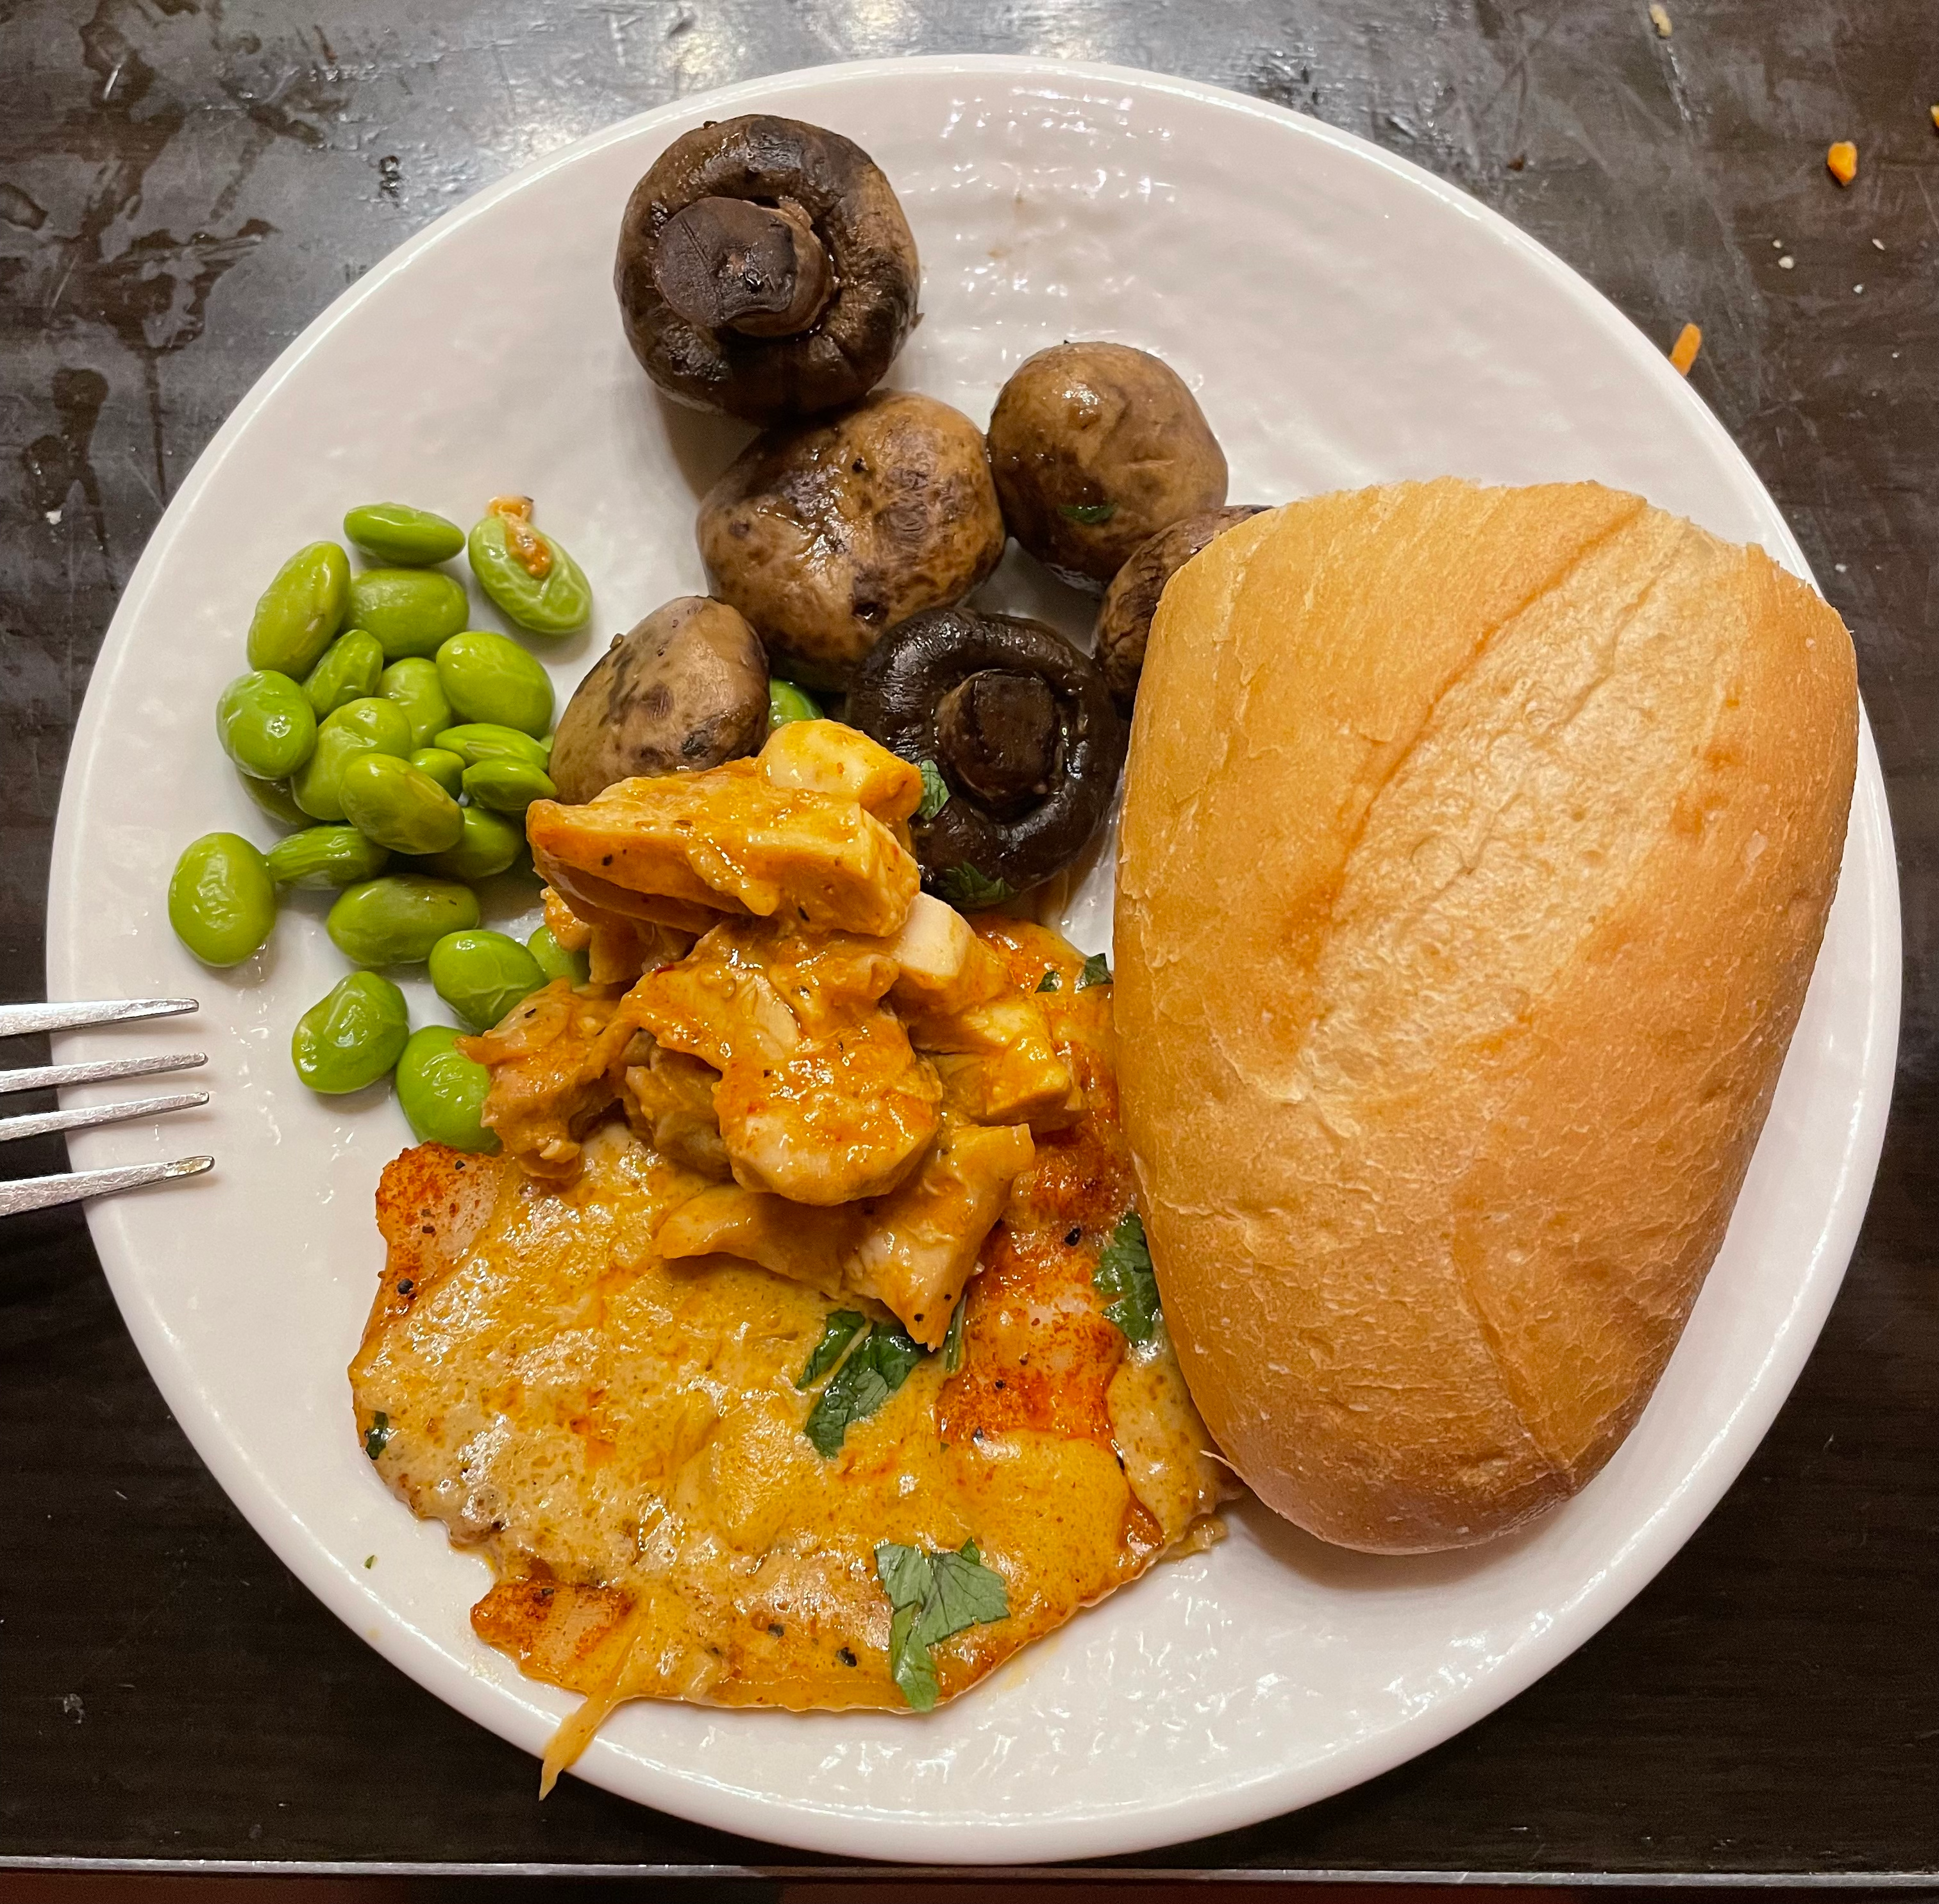 Chicken with bread (??), edamame, and mushrooms